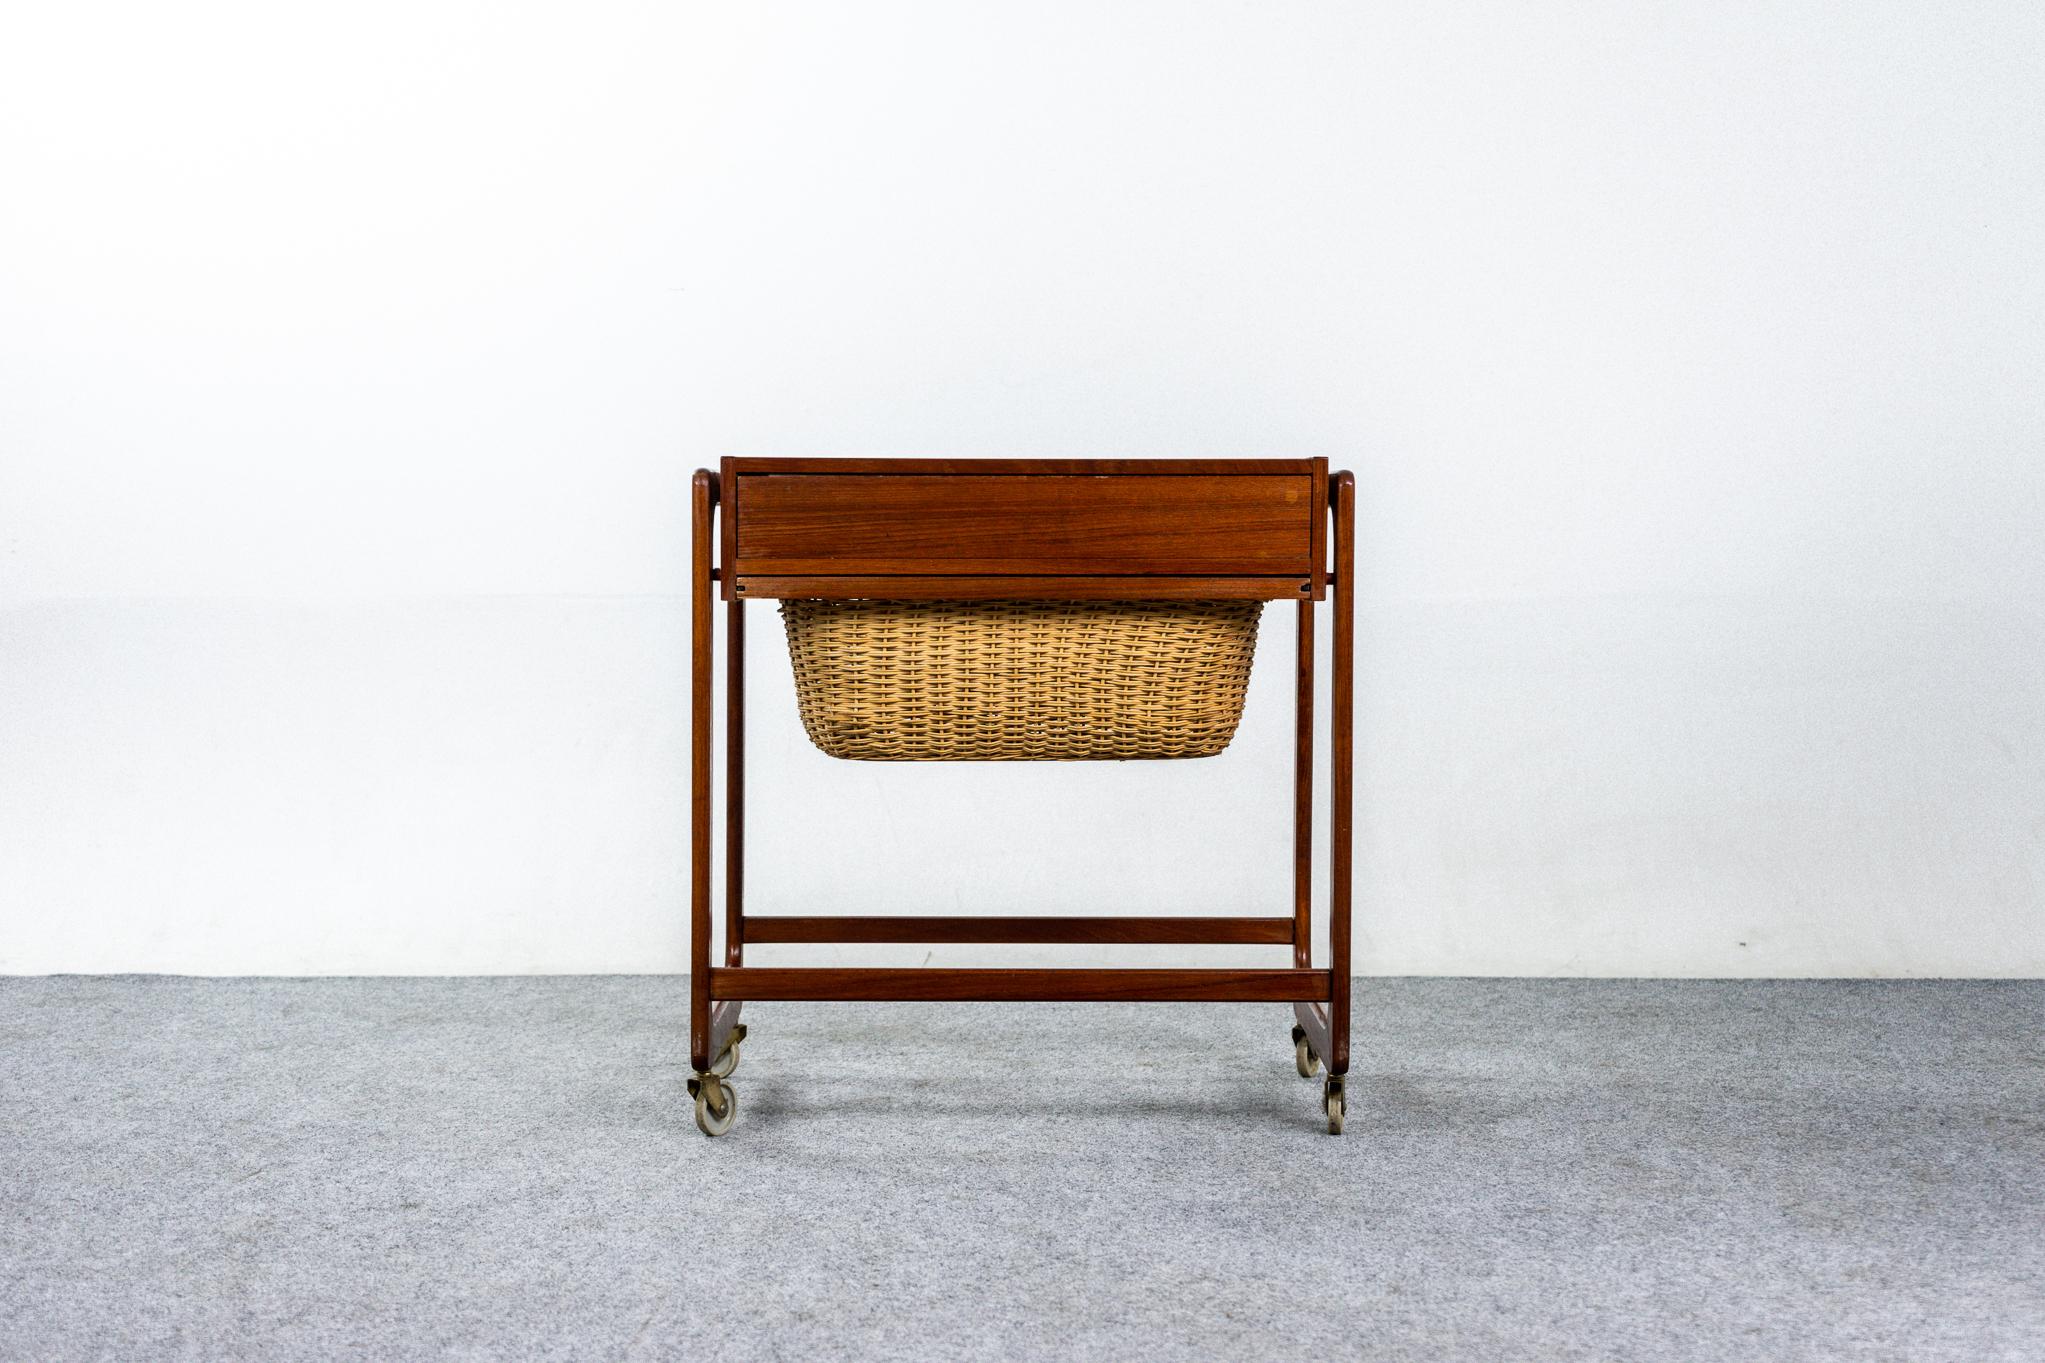 Teak Mid-Century Modern sewing table, circa 1960s. Beauitful graining, original sleek casters, fitted interior and woven basket. Get crafting!